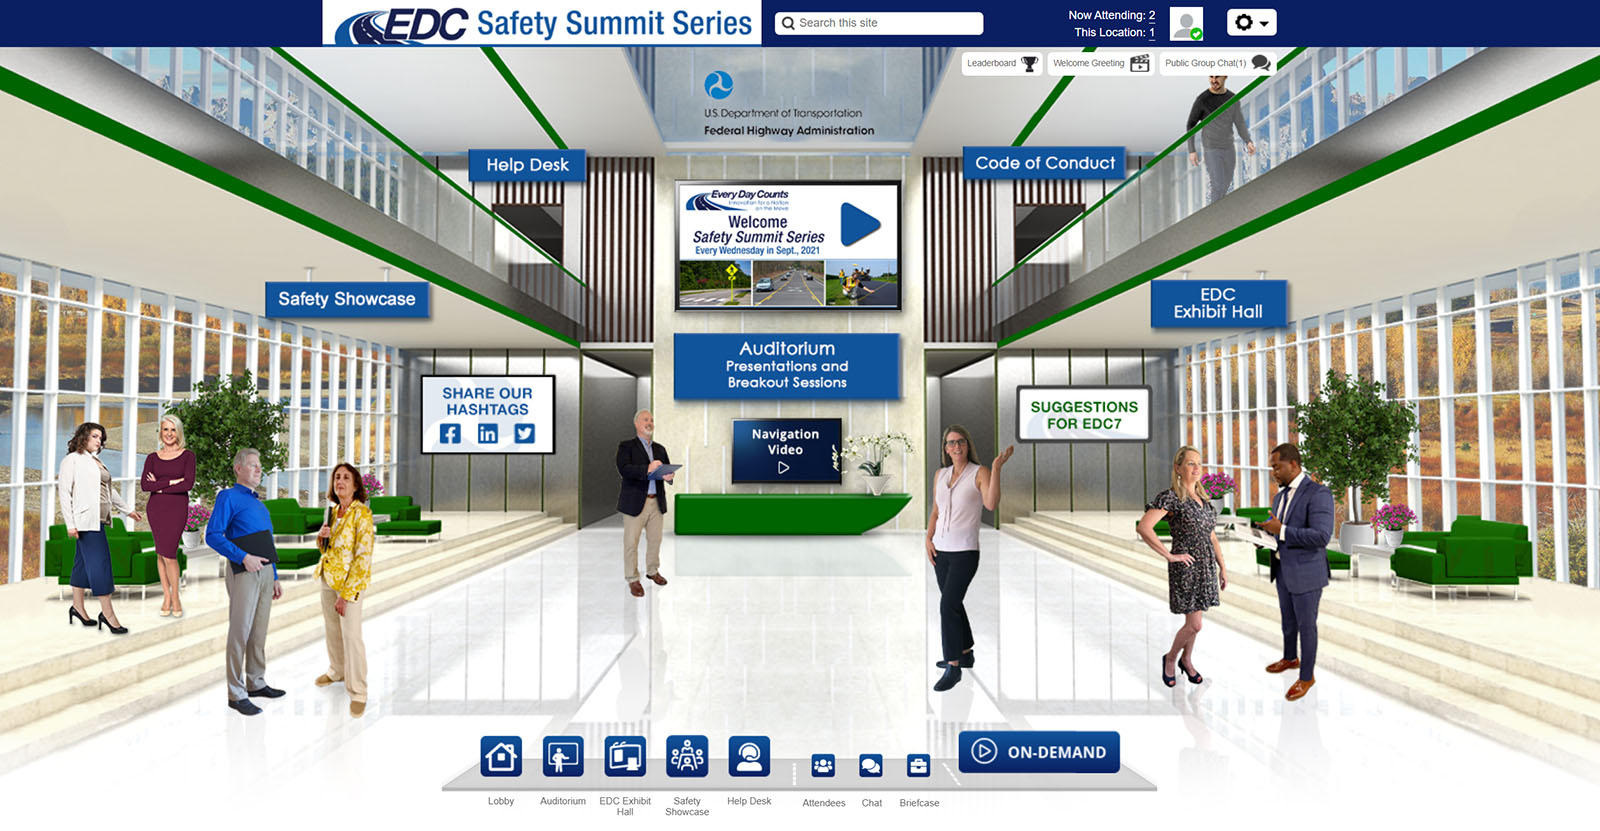 View any of the Safety Summit sessions on demand from the virtual conference platform website.